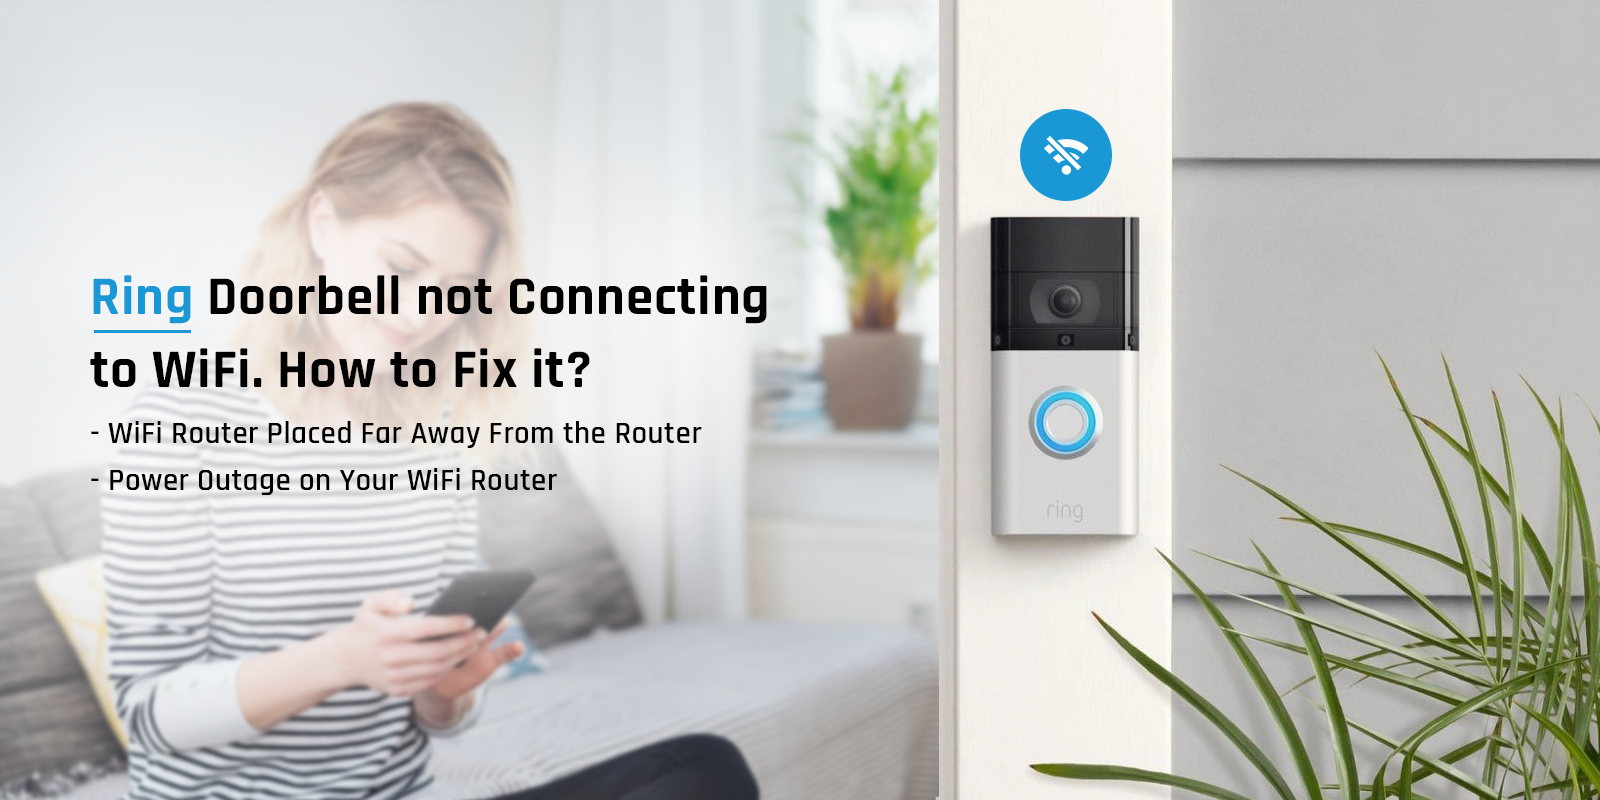 Ring Doorbell not Connecting to WiFi. How to Fix it?